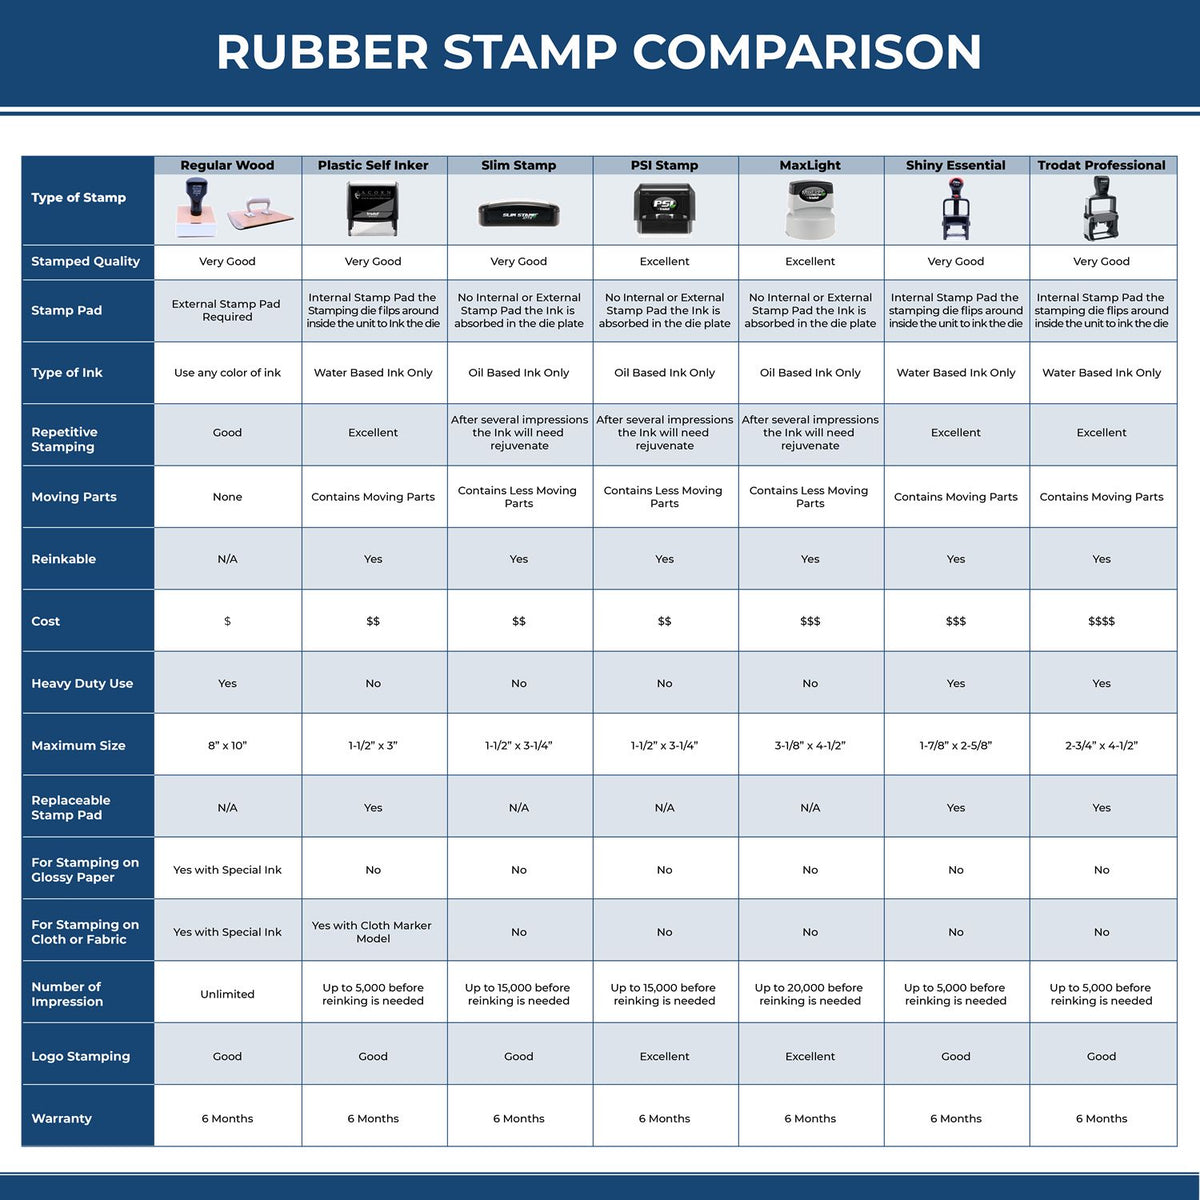 Large Restricted Delivery Rubber Stamp 4969R Rubber Stamp Comparison